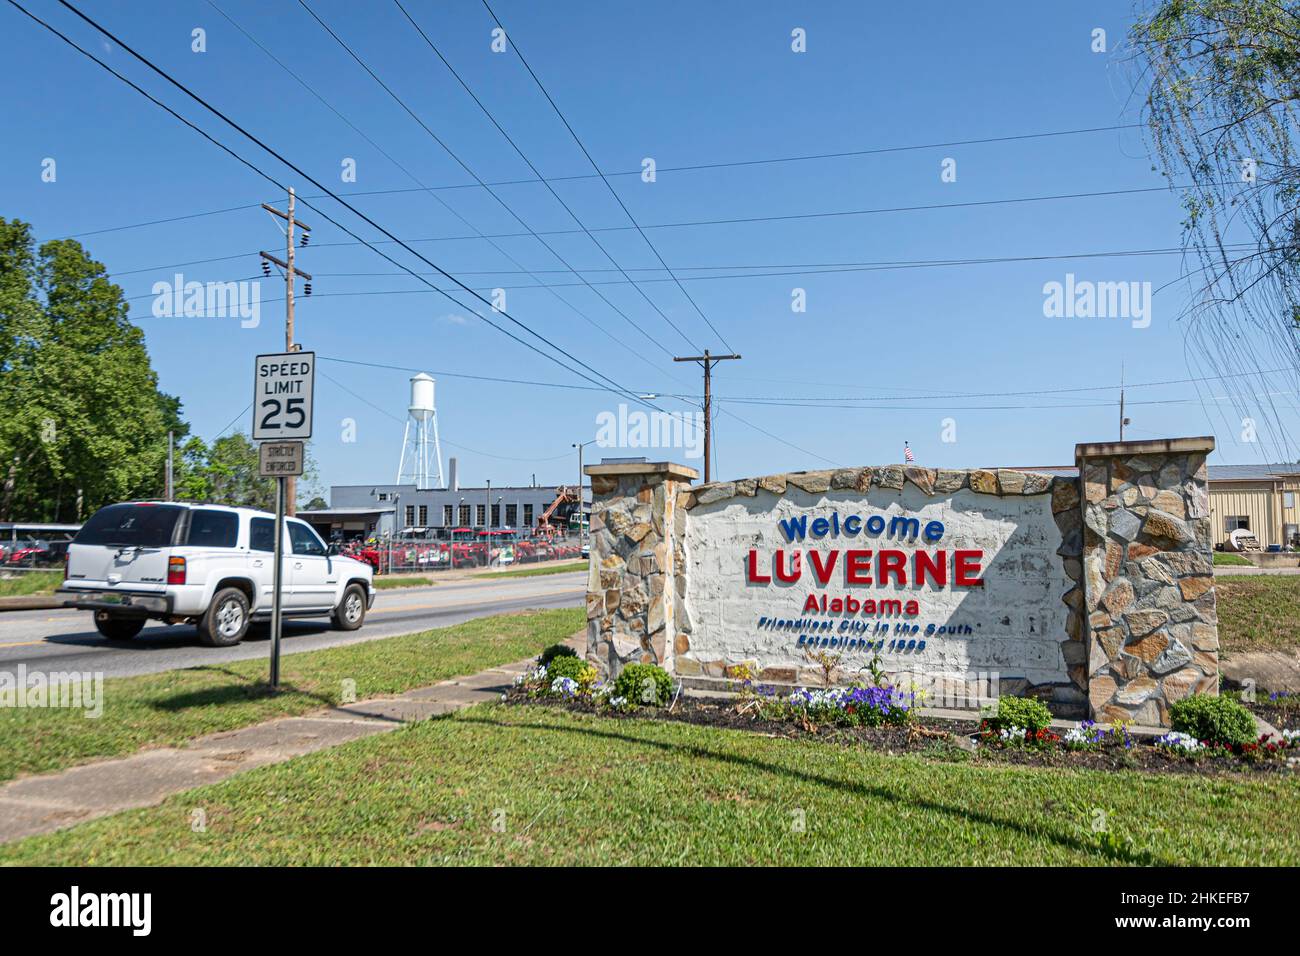 Luverne, Alabama, USA- April 21, 2021: Welcome sign on the outskirts of the town of Luverne. Stock Photo